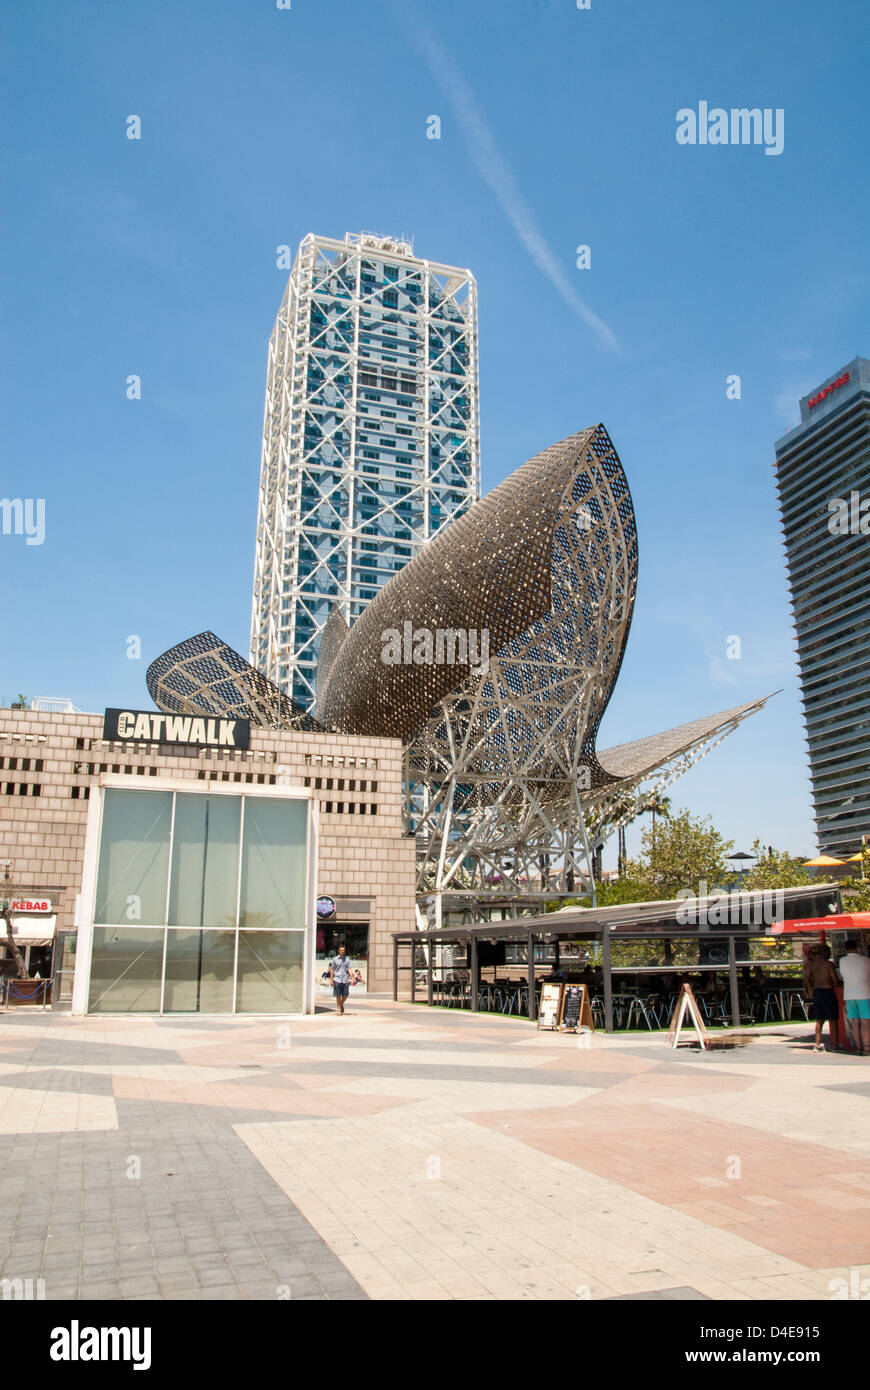 Spain, Catalonia, Barcelona, shopping mall or Peix Ballena (Whale) by Frank O. Gehry in the Olympic Village marina Stock Photo